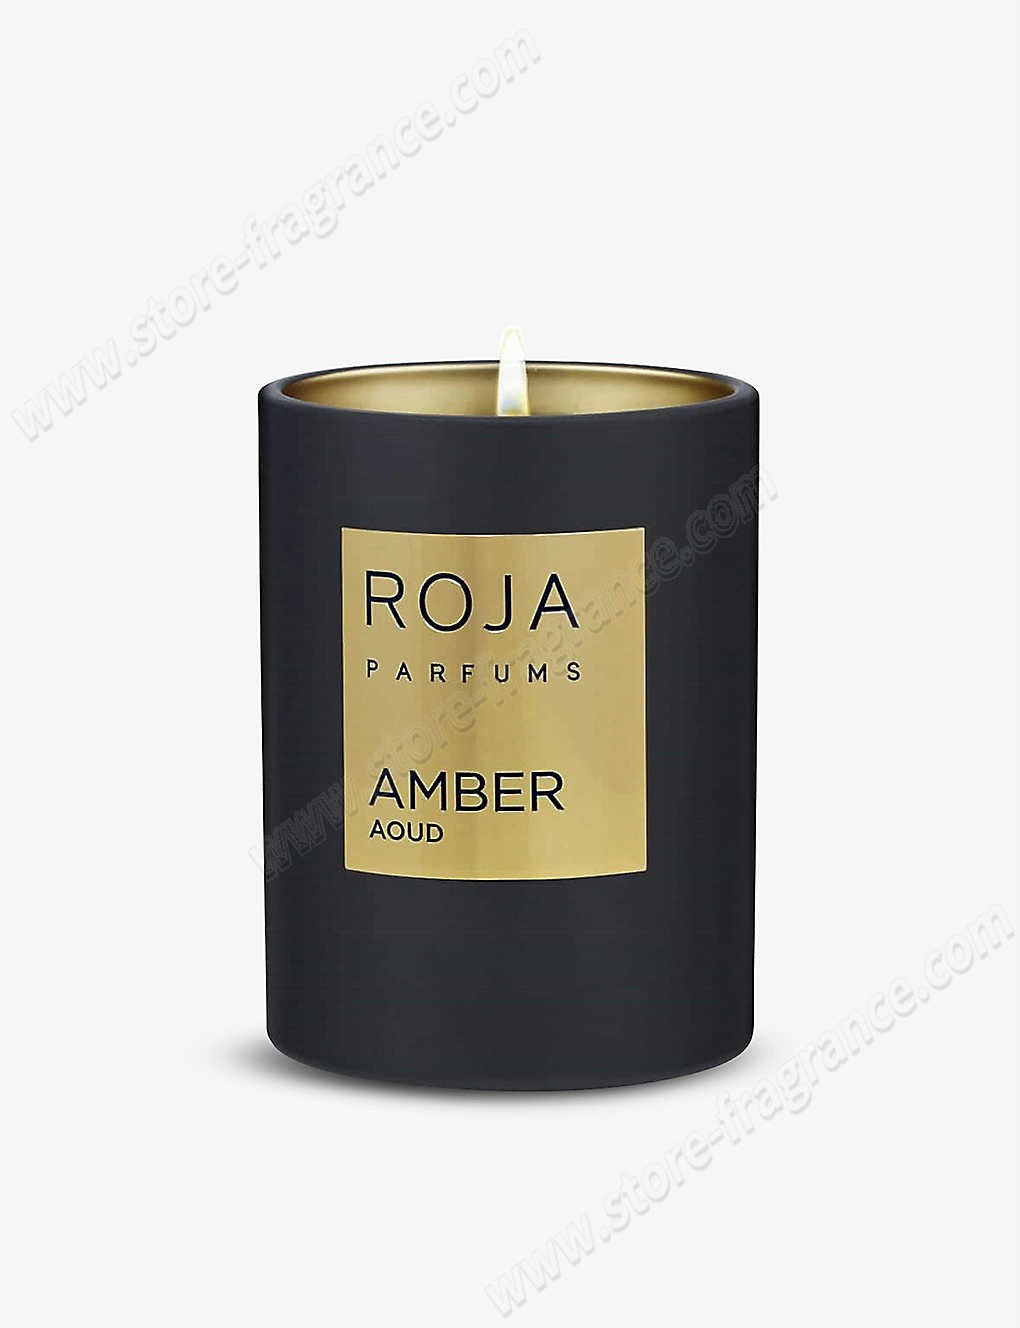 ROJA PARFUMS/Amber Aoud scented candle 300g ✿ Discount Store - -0